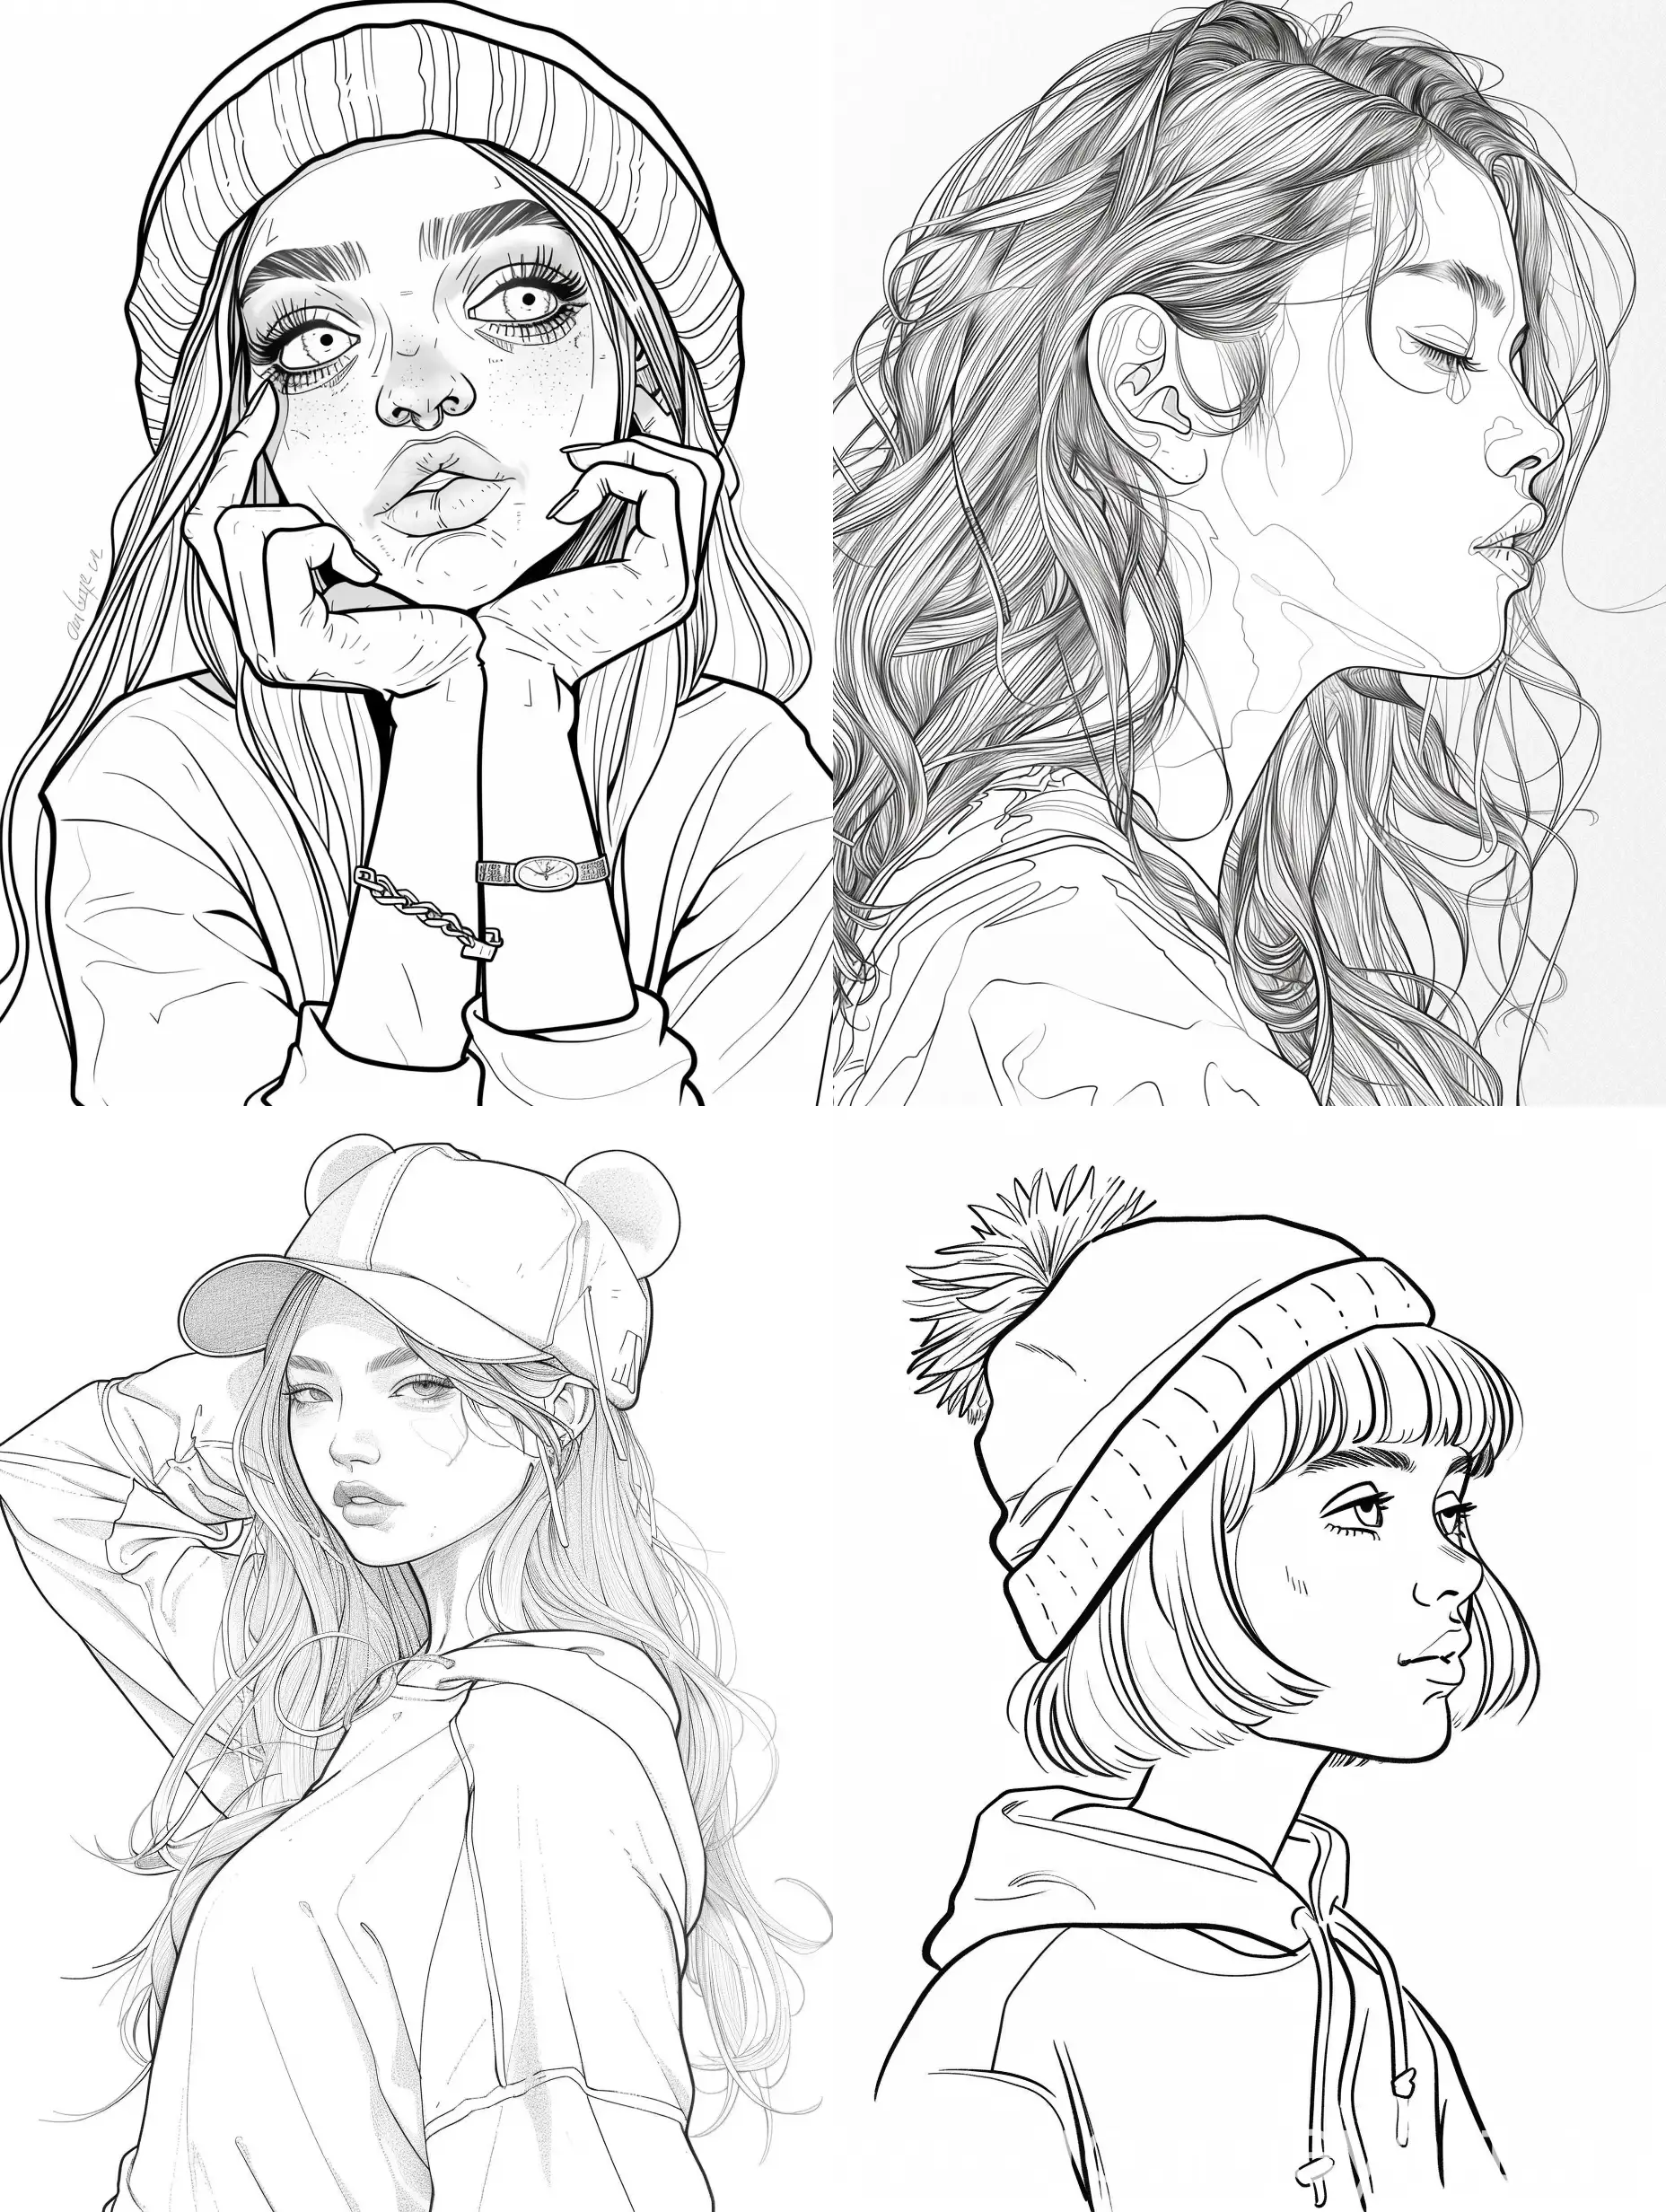 Bearbrickjia-Style-Girl-in-Black-and-White-Linear-Drawing